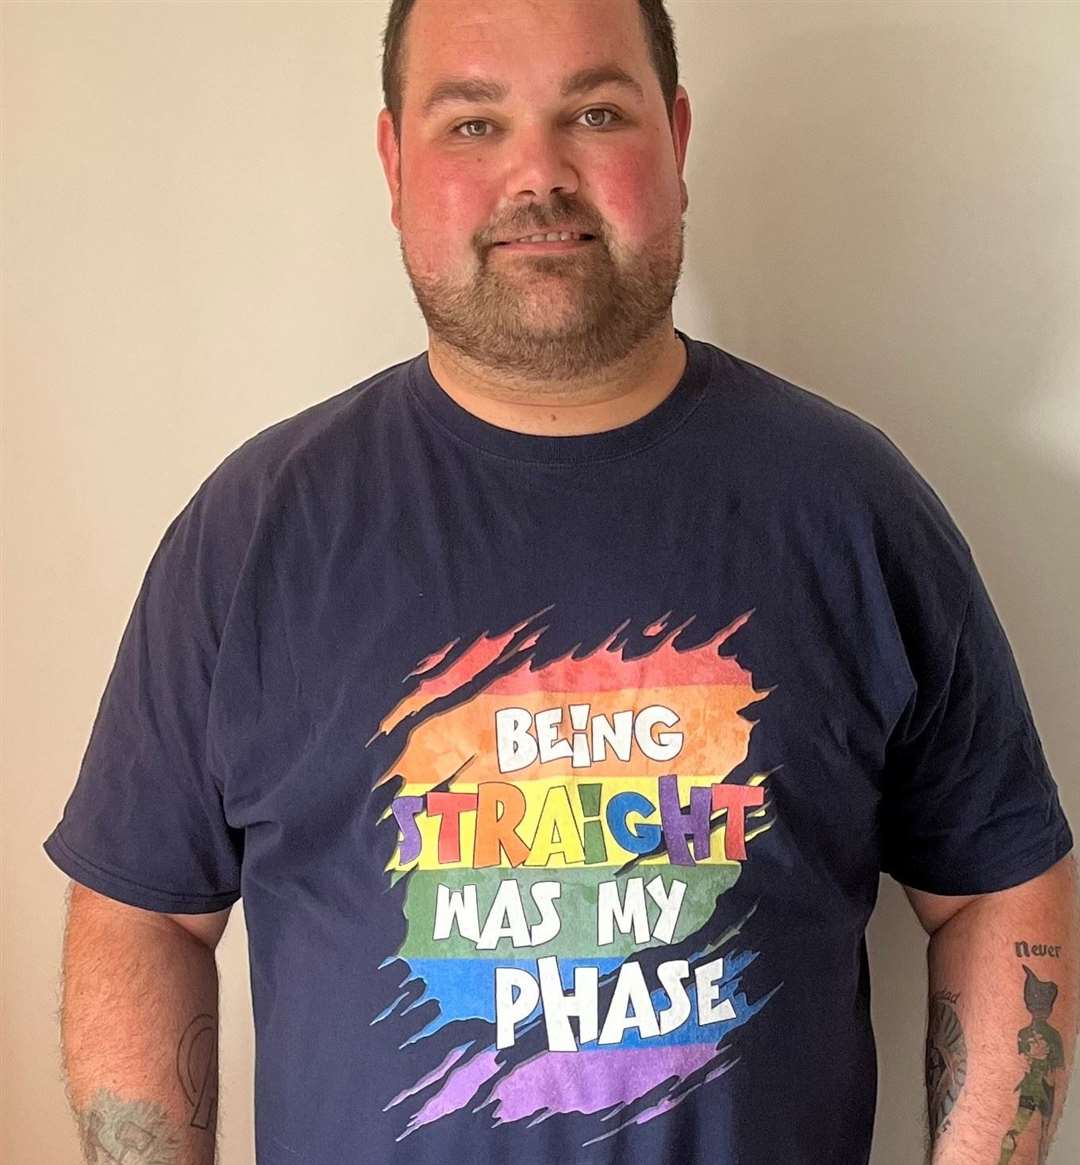 Sam Fry with the t-shirt he wore to his first Pride event